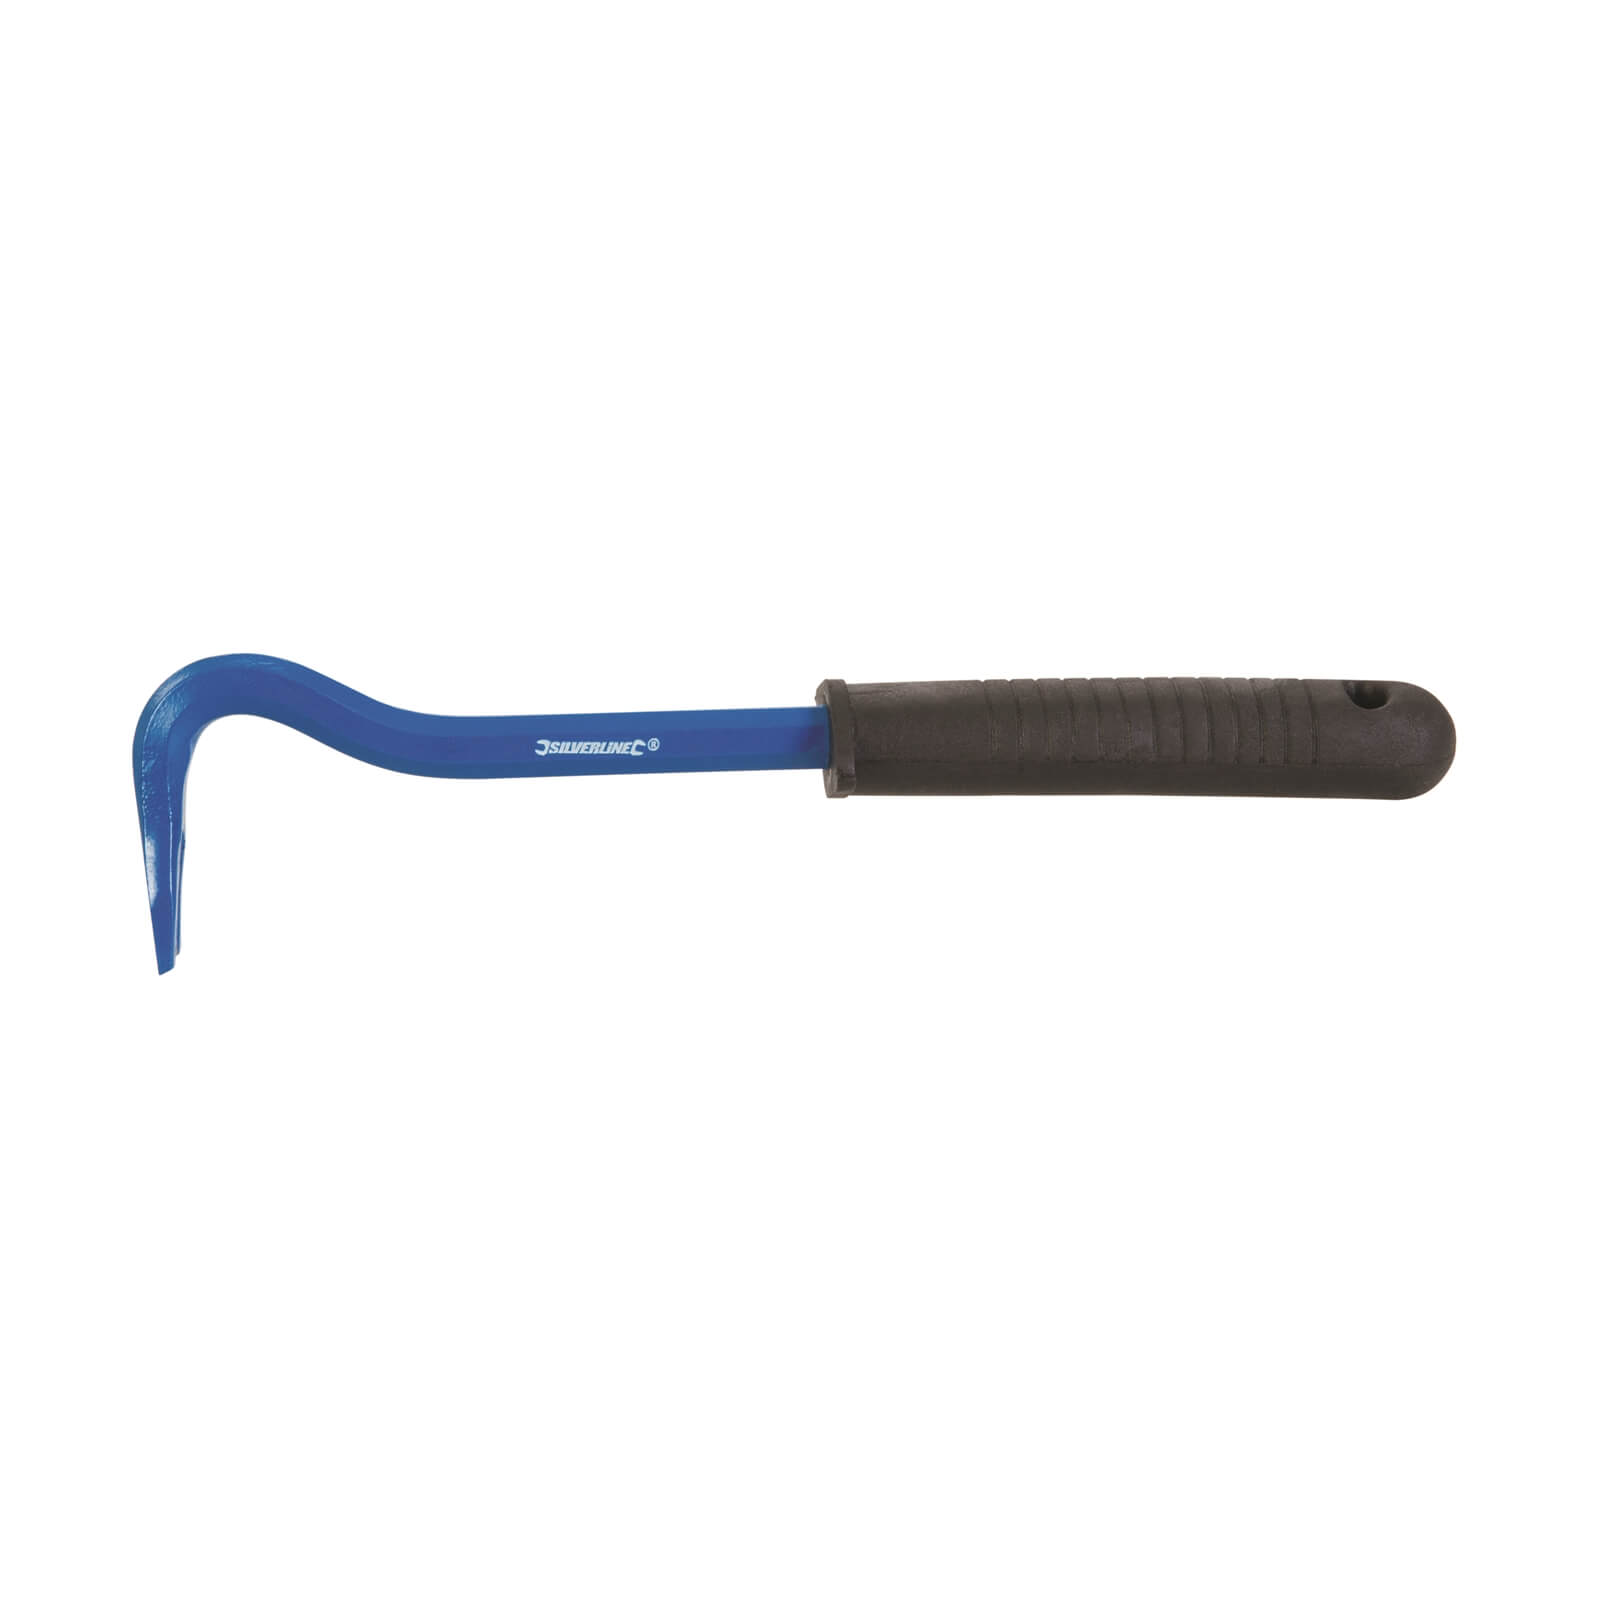 Silverline Nail Puller 250mm